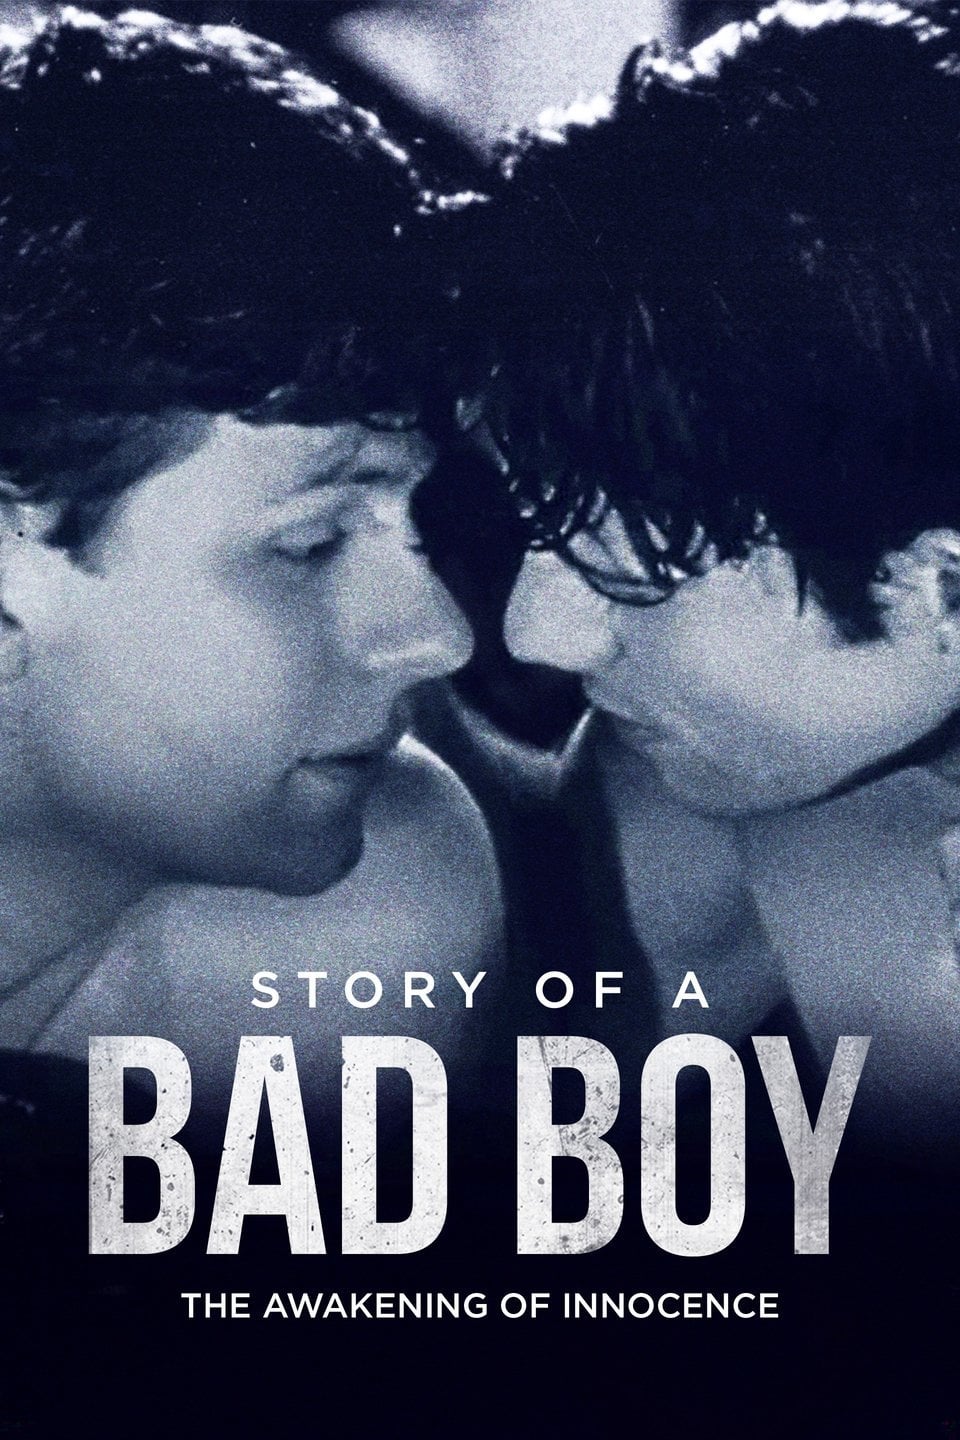 Story of a Bad Boy (1999)